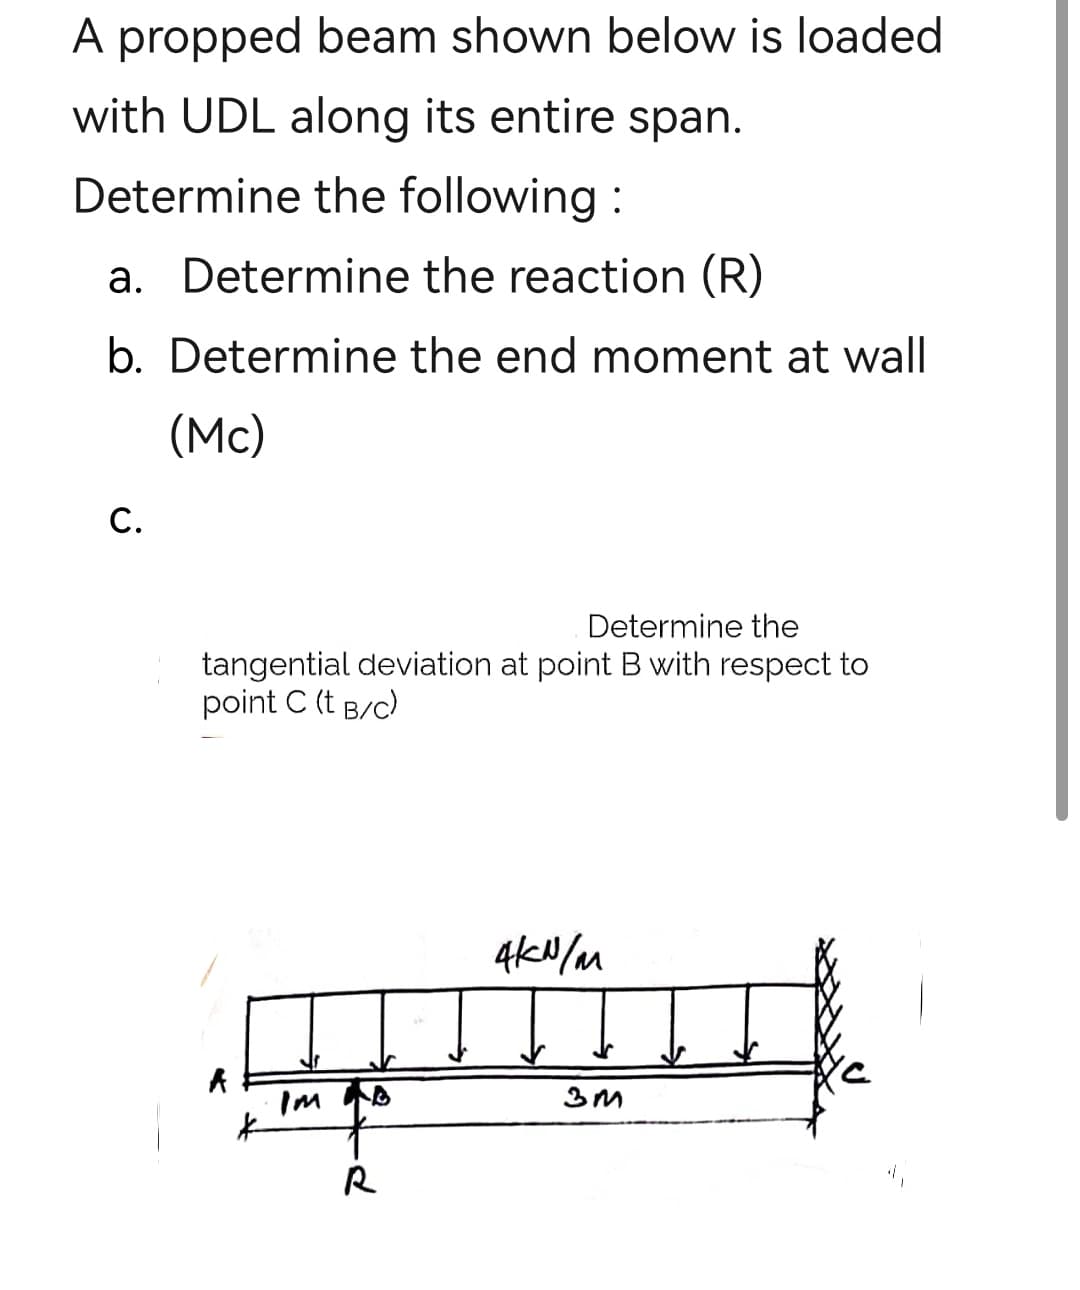 A propped beam shown below is loaded
with UDL along its entire span.
Determine the following:
a. Determine the reaction (R)
b. Determine the end moment at wall
(Mc)
C.
Determine the
tangential deviation at point B with respect to
point C (t B/C)
A
d
4kN/m
Ţ
3M